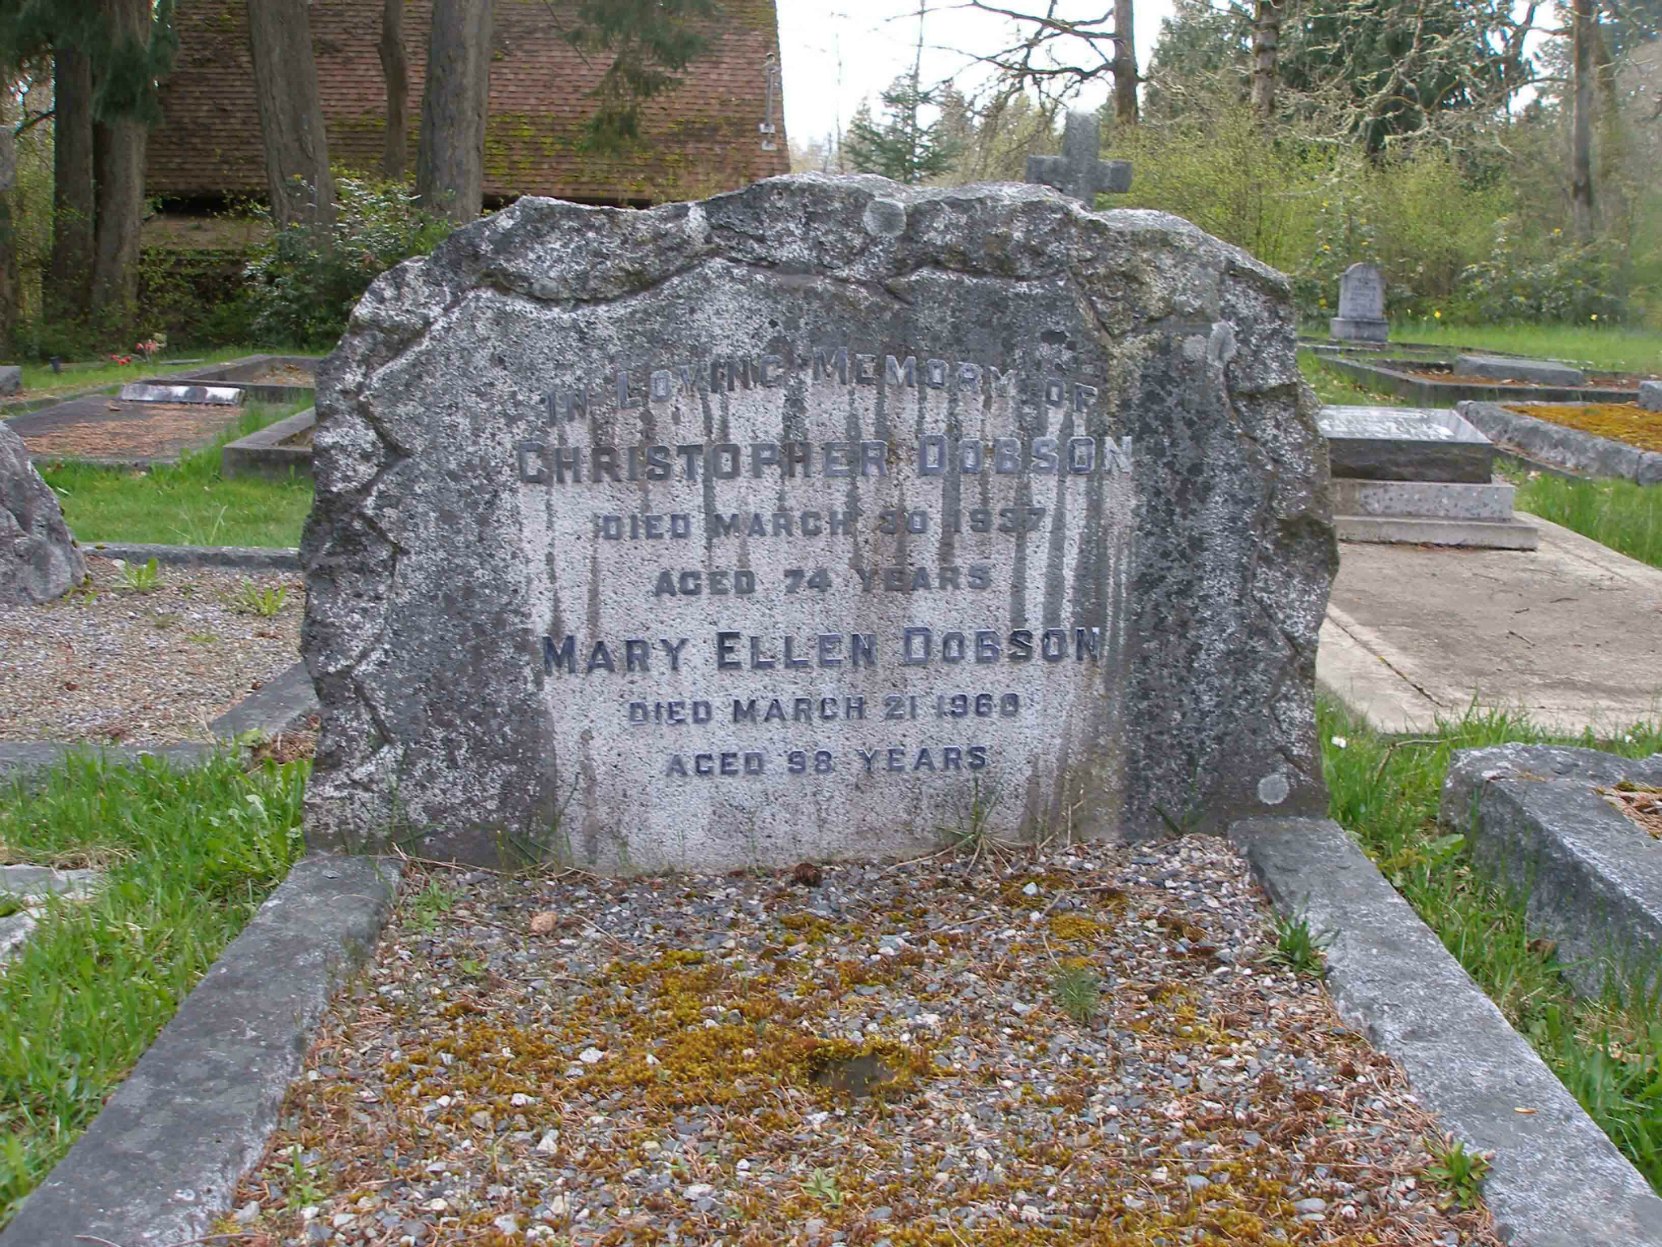 Christopher Dobson and Mary Ellen Dobson grave, St. Peter's Quamichan cemetery